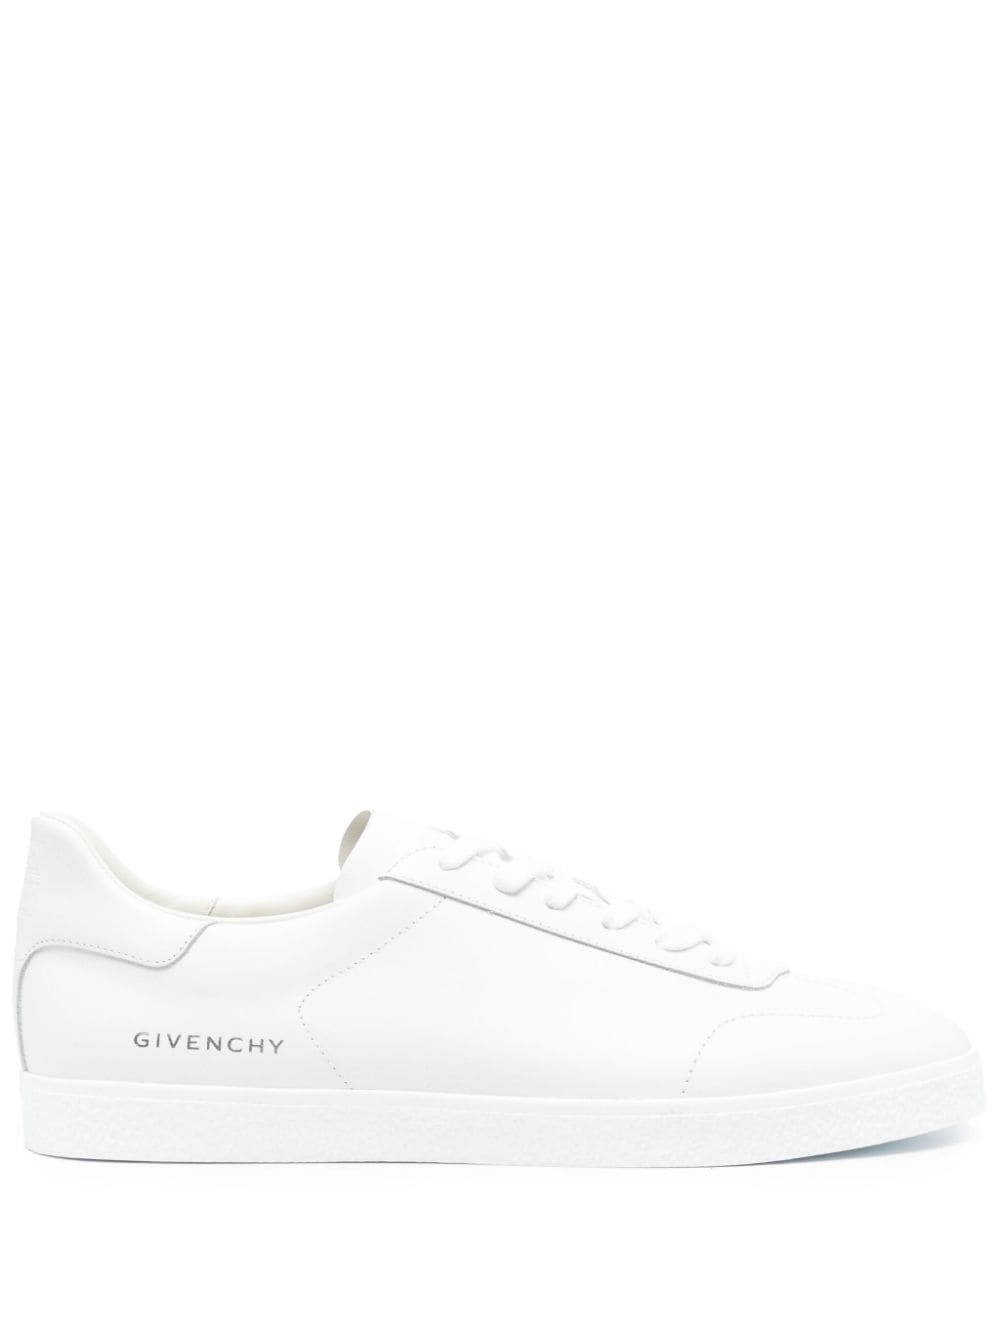 Givenchy Town leather sneakers - White von Givenchy